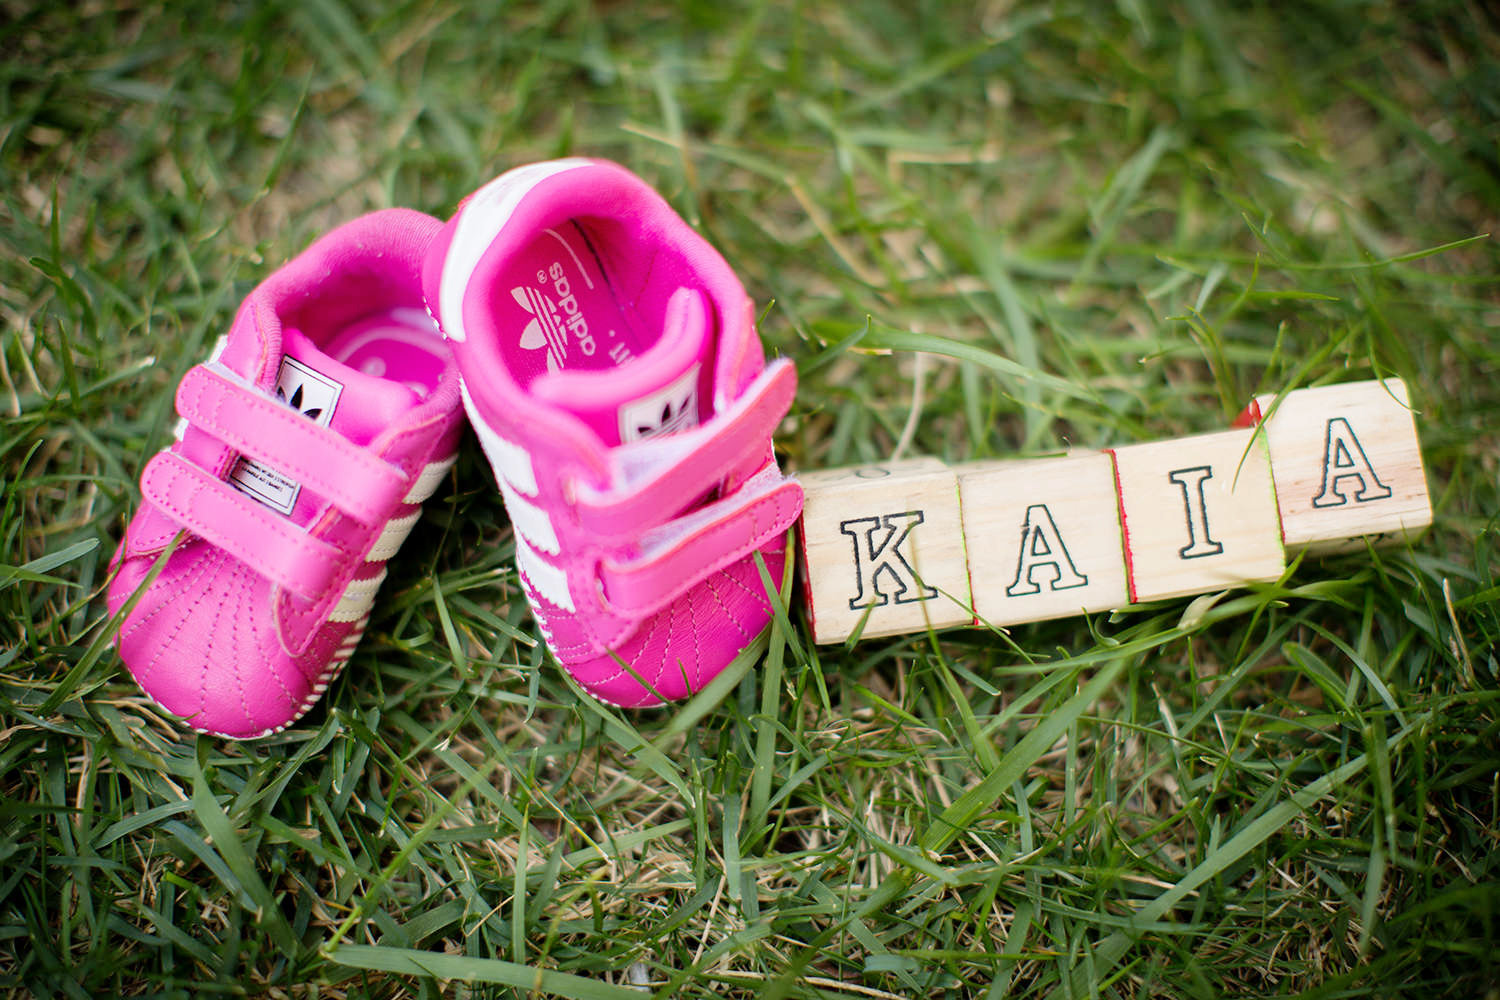 Exquisite baby shoes with baby blocks were used during this Maternity Session.